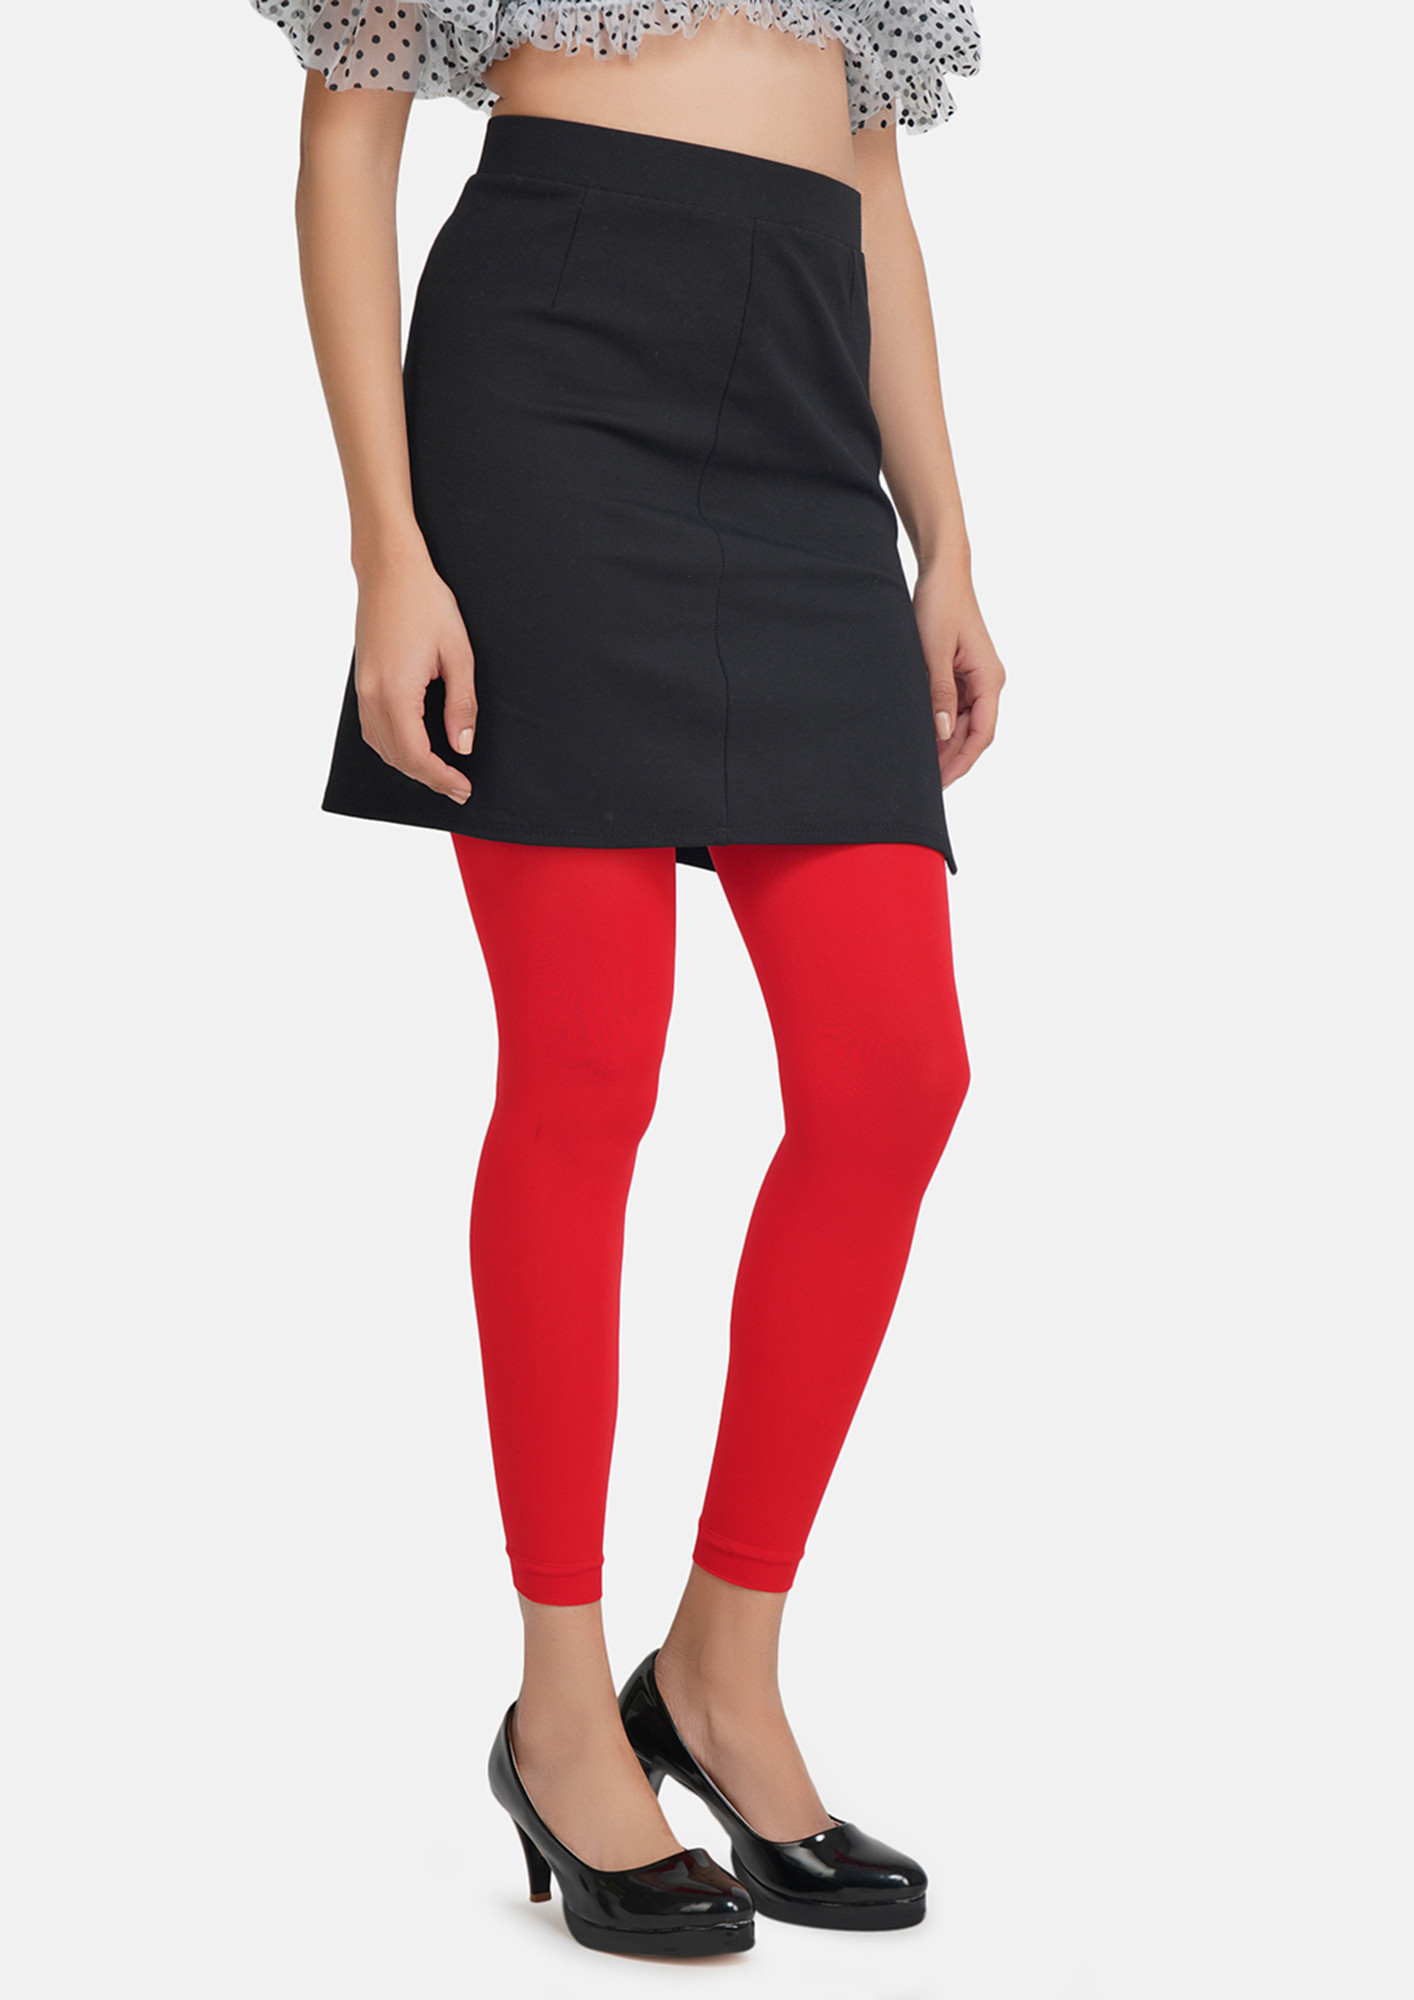 Red Footless Tights